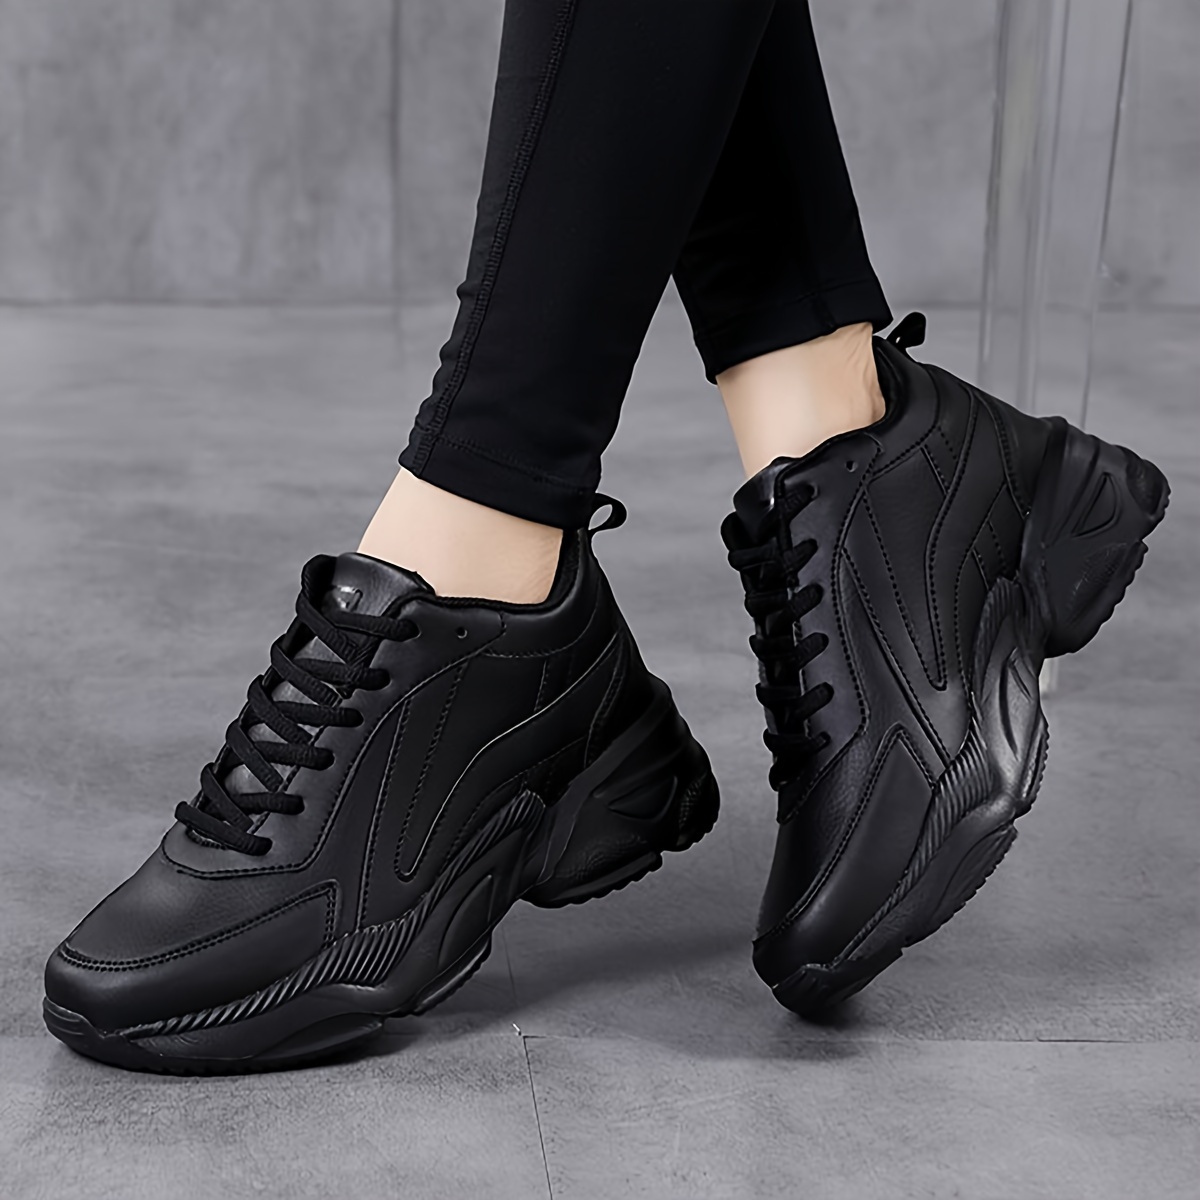 

Women's Fashion Solid Color Sneakers, Casual Sports Running & Walking Shoes, Versatile Low-top Sporty Trainers